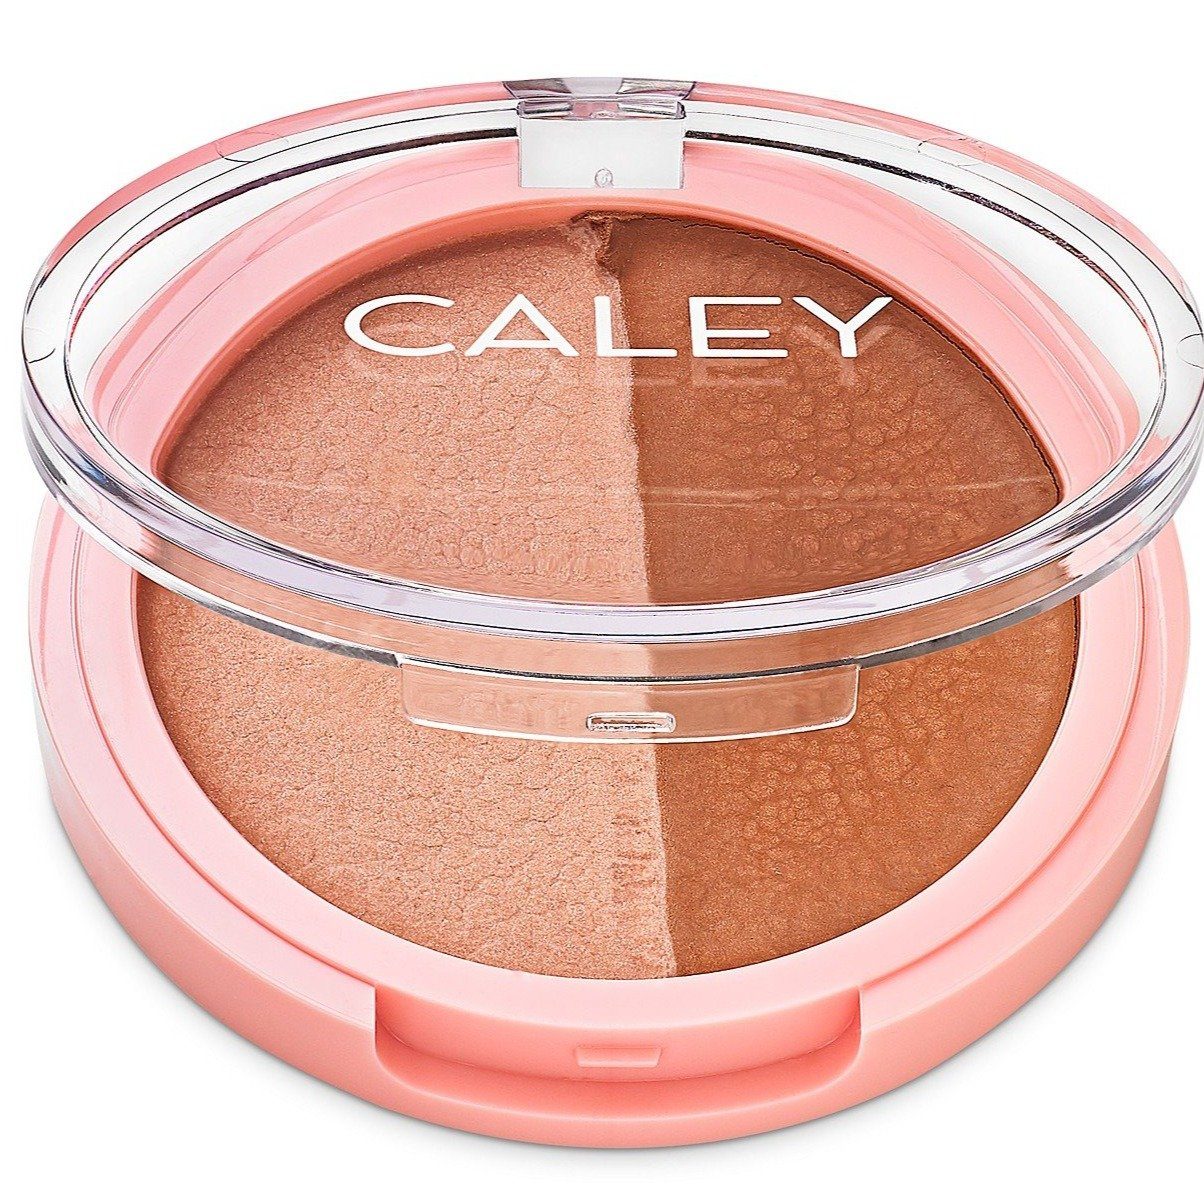 Beach Babe Cream-to-Glow Face Caley Signature Glow 